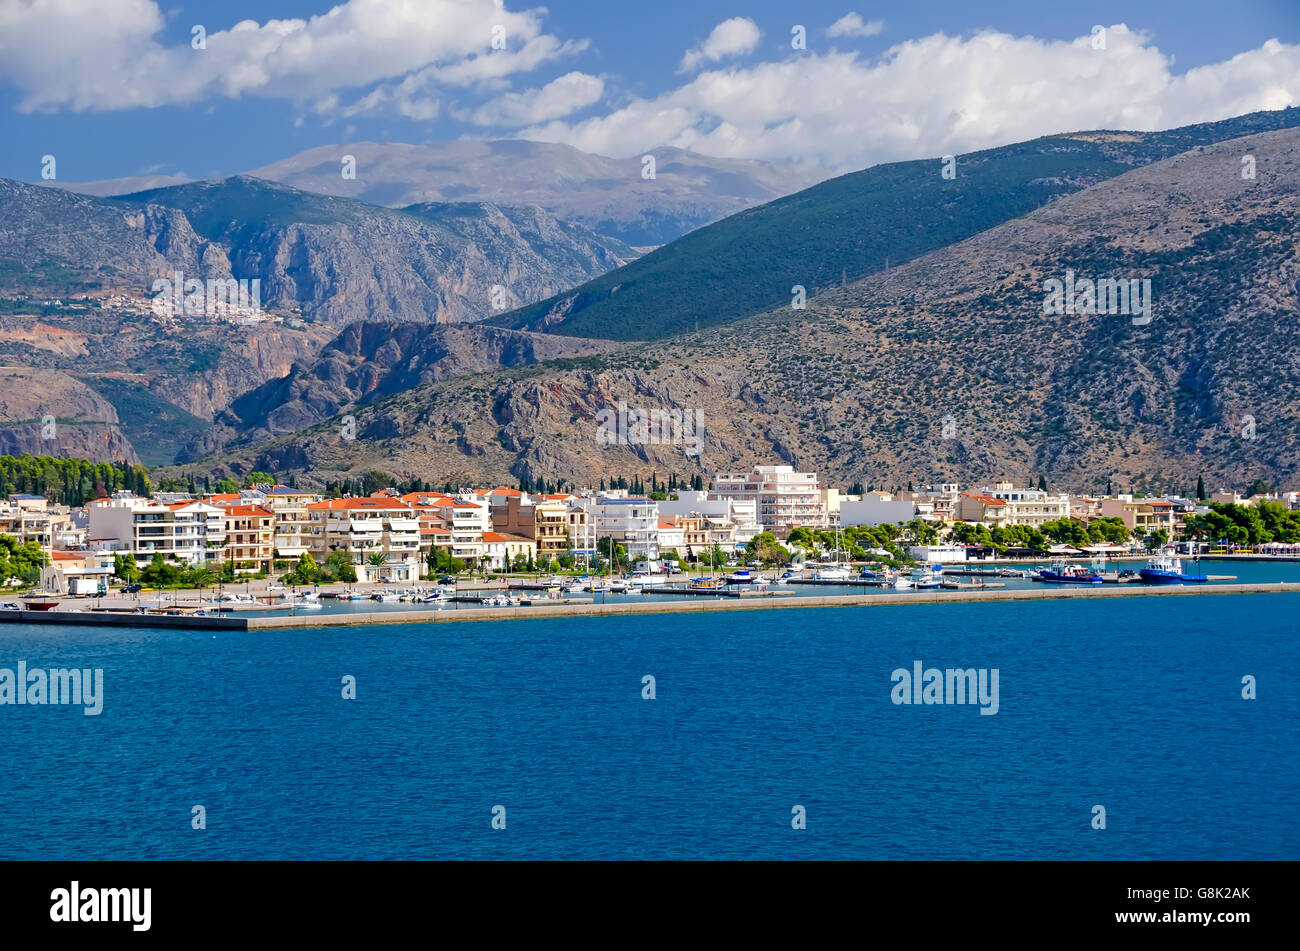 Itea Greece harbor town mountains part of municipality of Delphi. Stock Photo